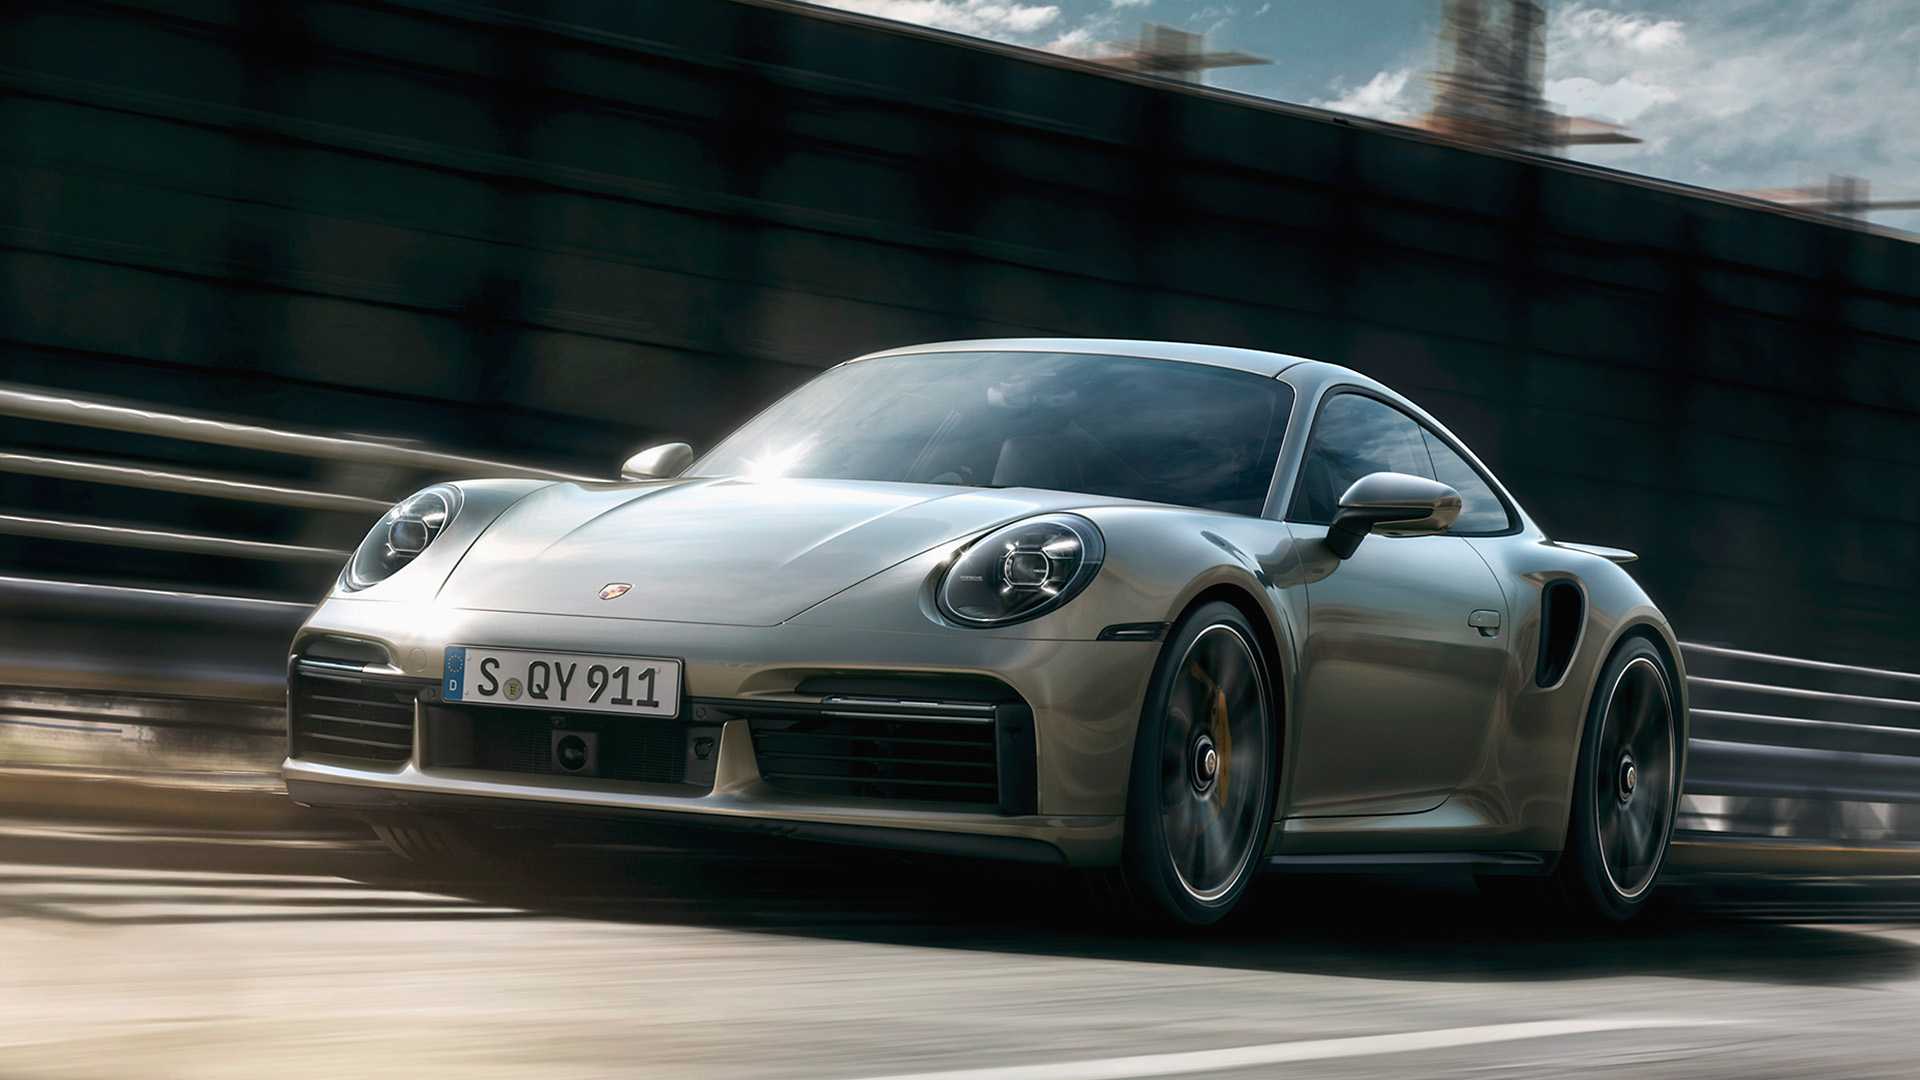 Porsche 911 Turbo S Coupe, Cabriolet Revealed With 640 HP